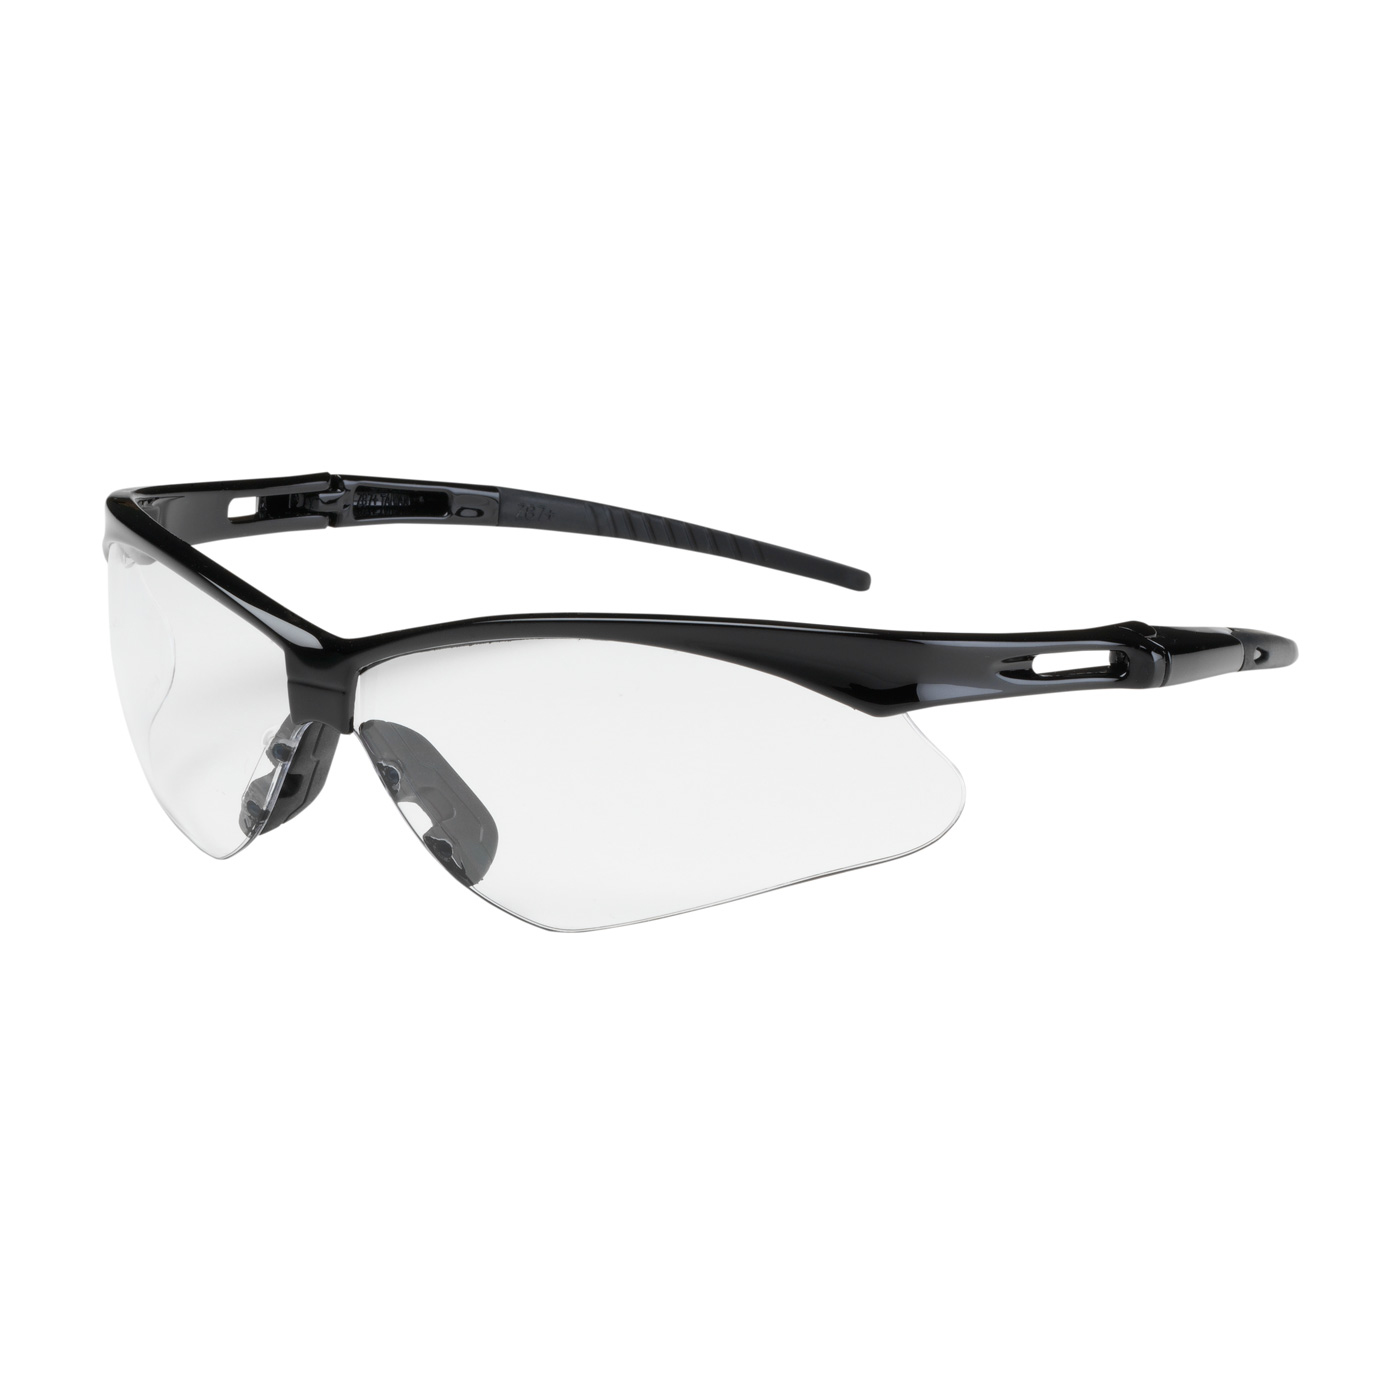 Anser Semi-Rimless Safety Glasses w/Clear Lens